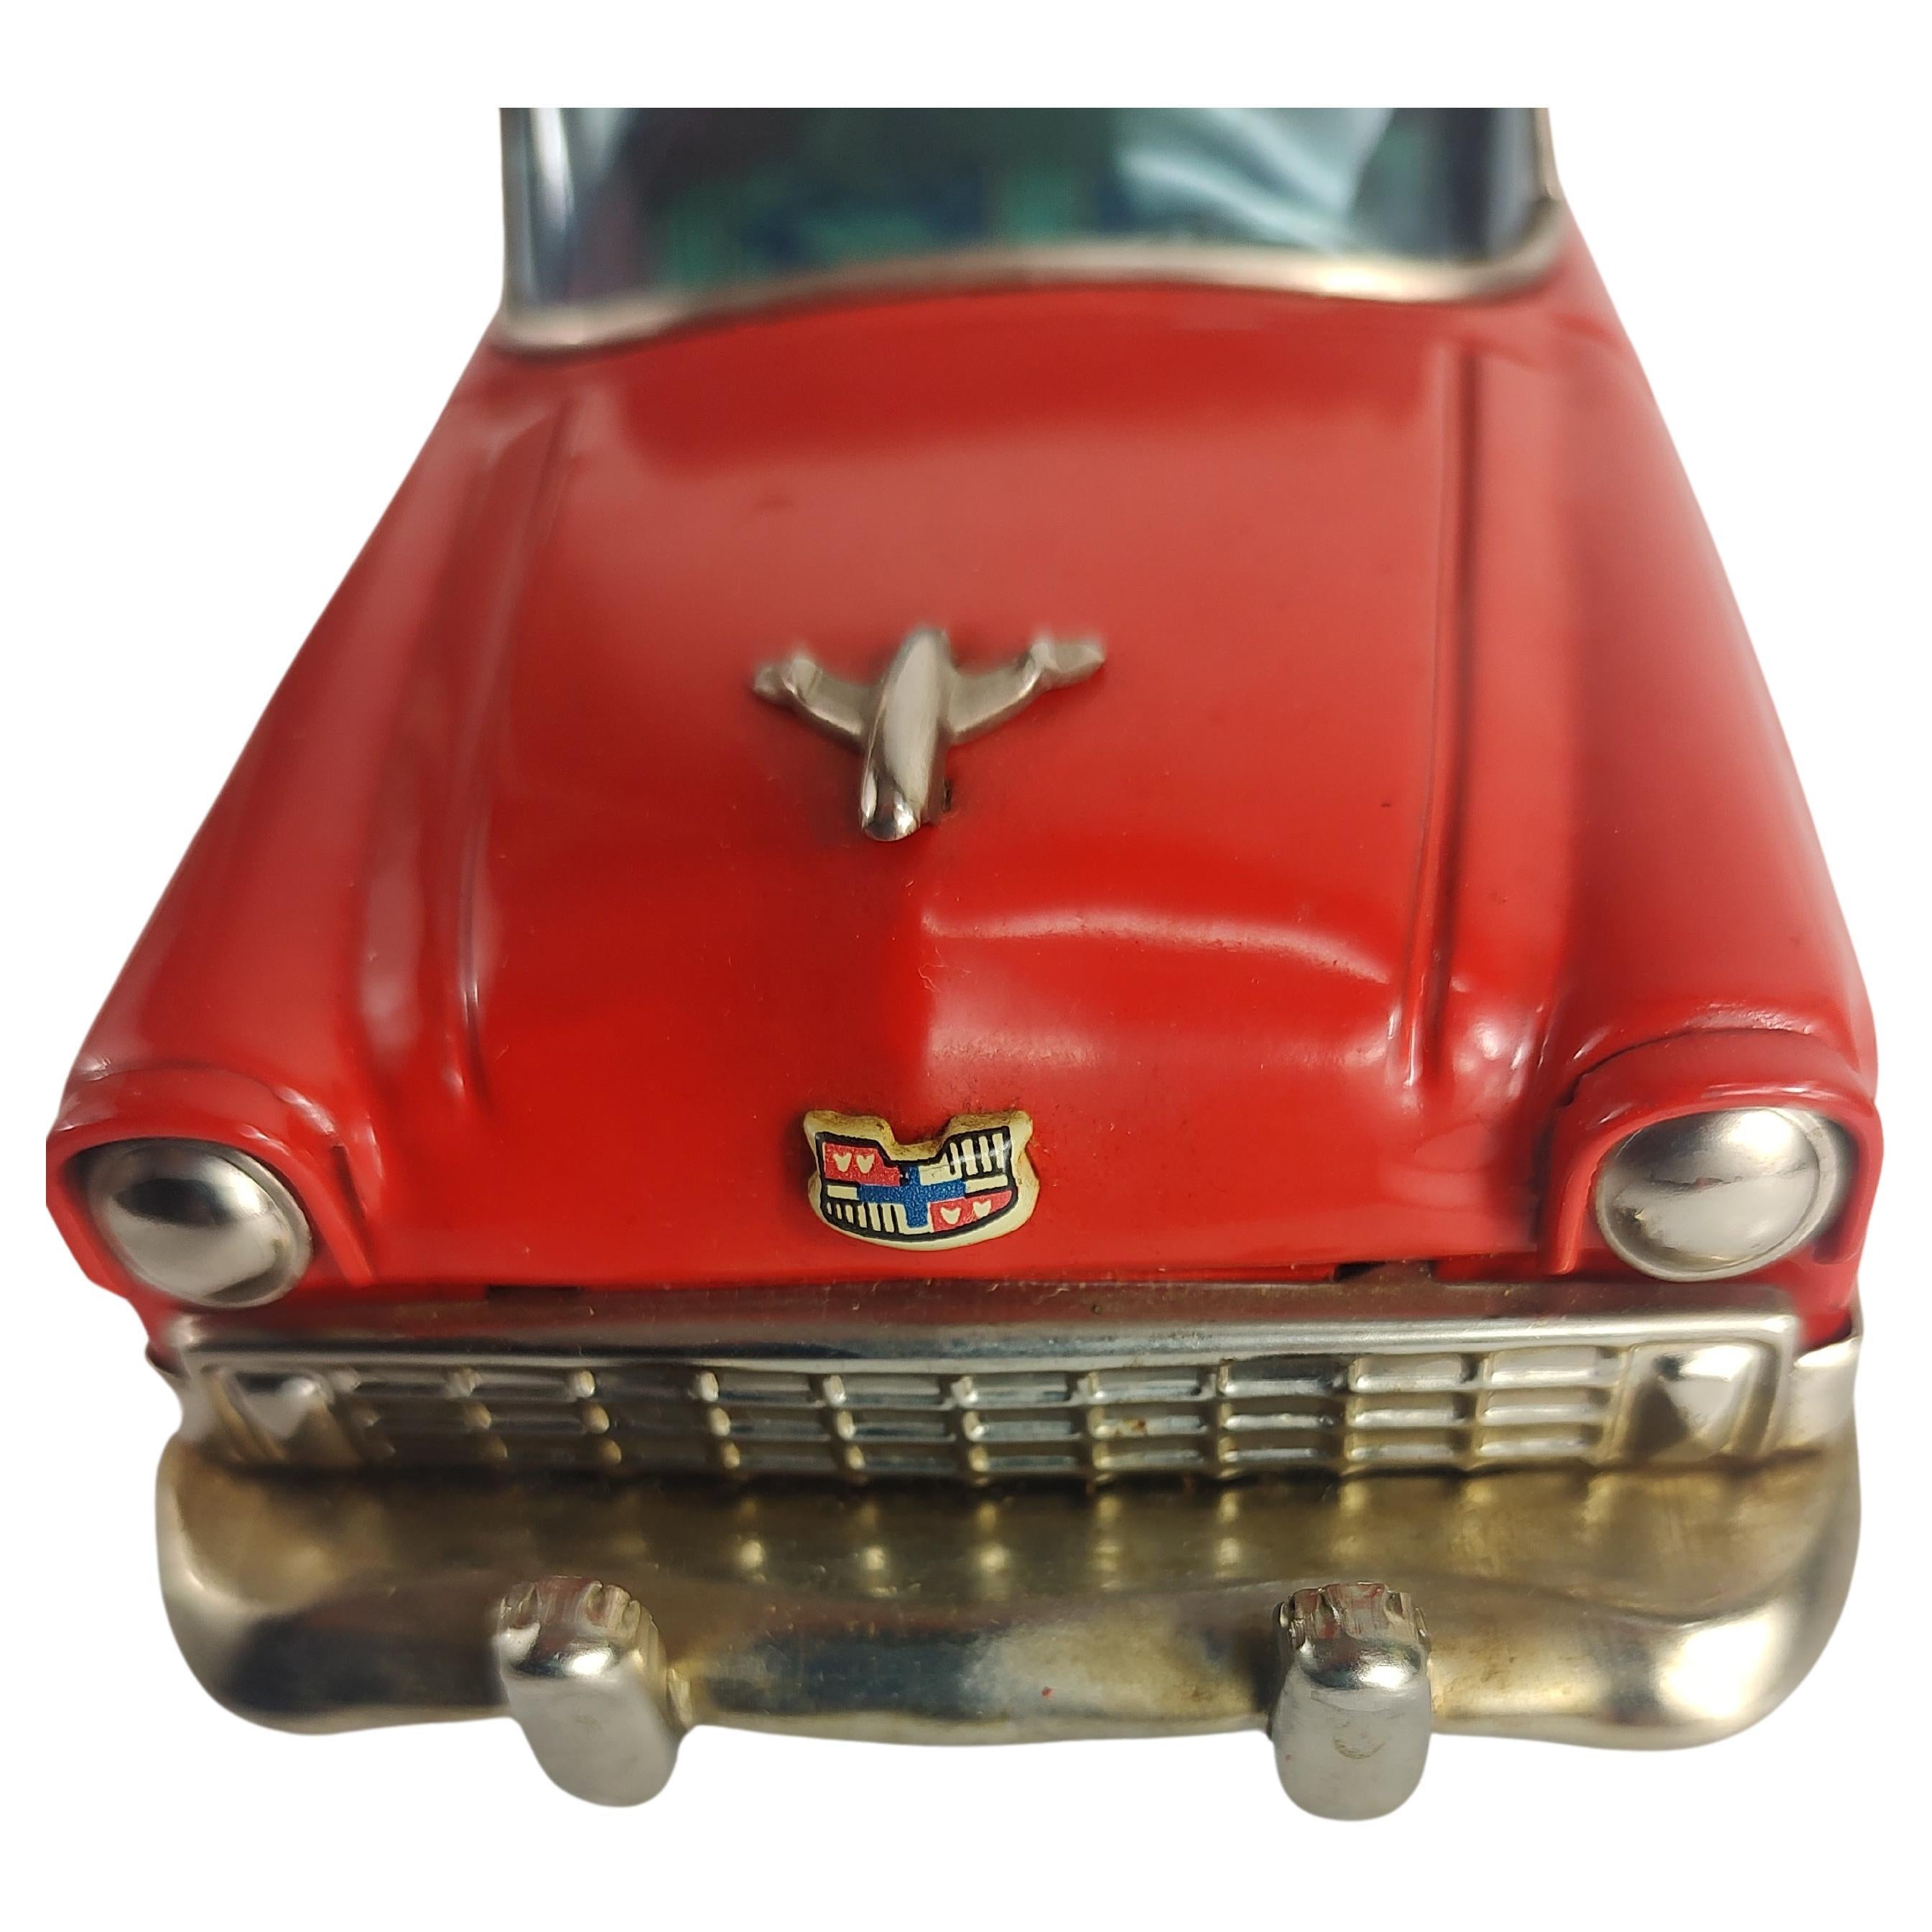 Mid Century Japanese Tin Litho Friction Toy Car Chevrolet Station Wagon C1956 In Good Condition For Sale In Port Jervis, NY